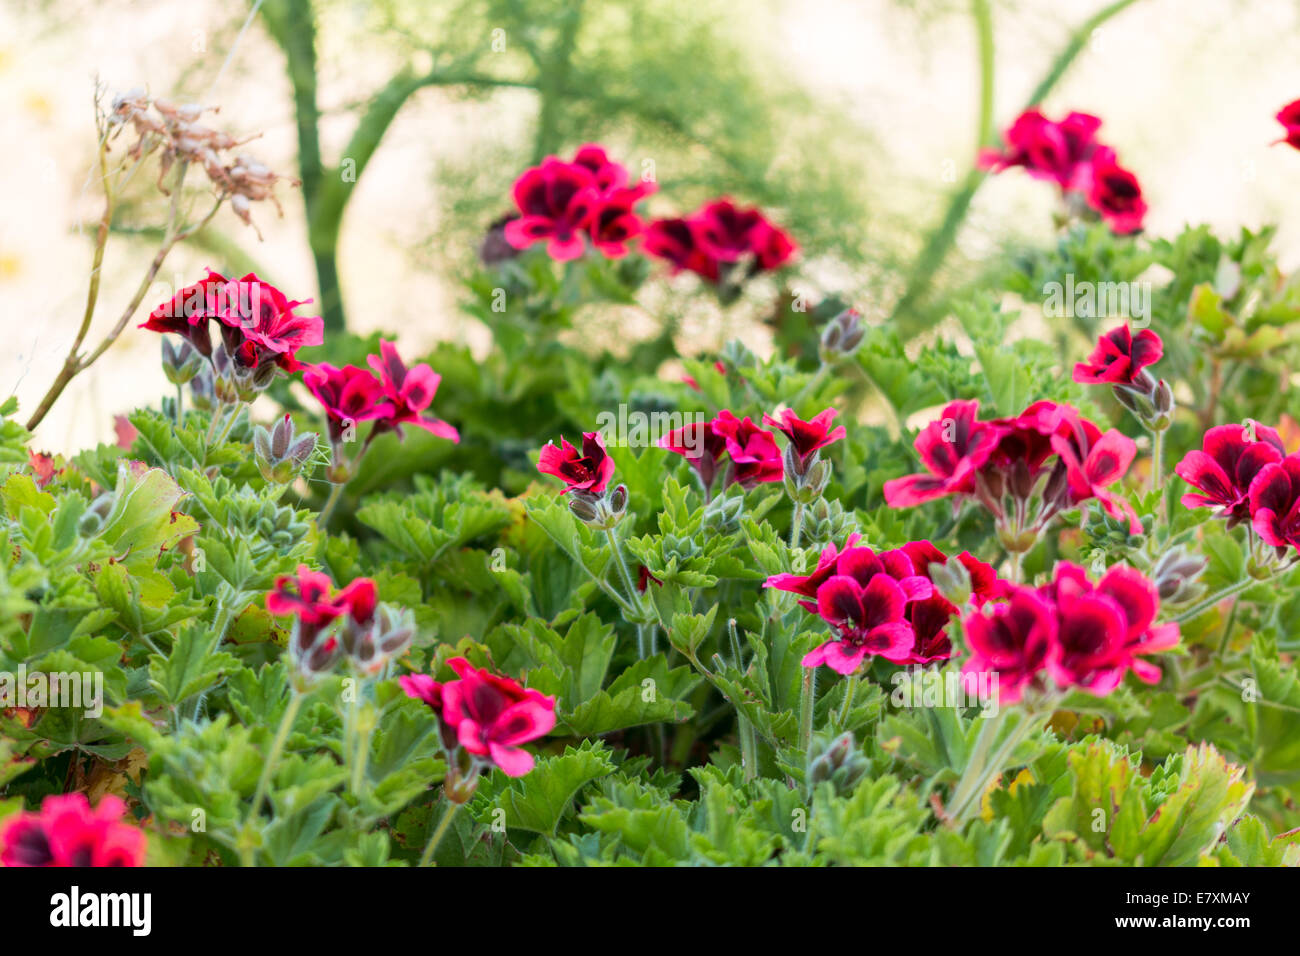 Red flowers with black spots Stock Photo